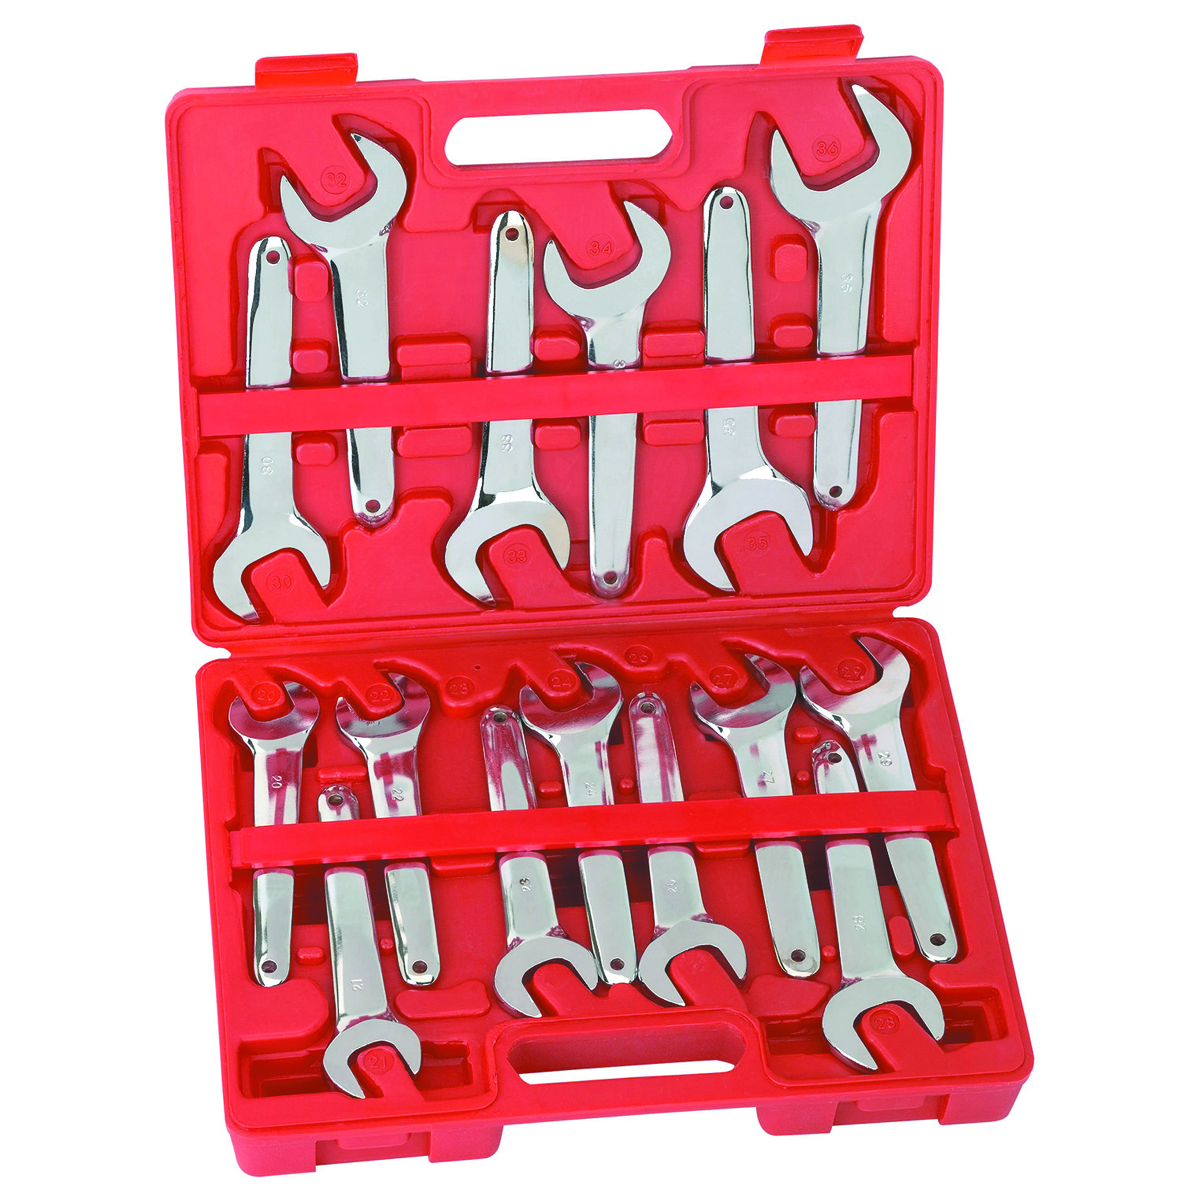 PITTSBURGH Metric Service Wrench Set 15 Pc. - Item 93668